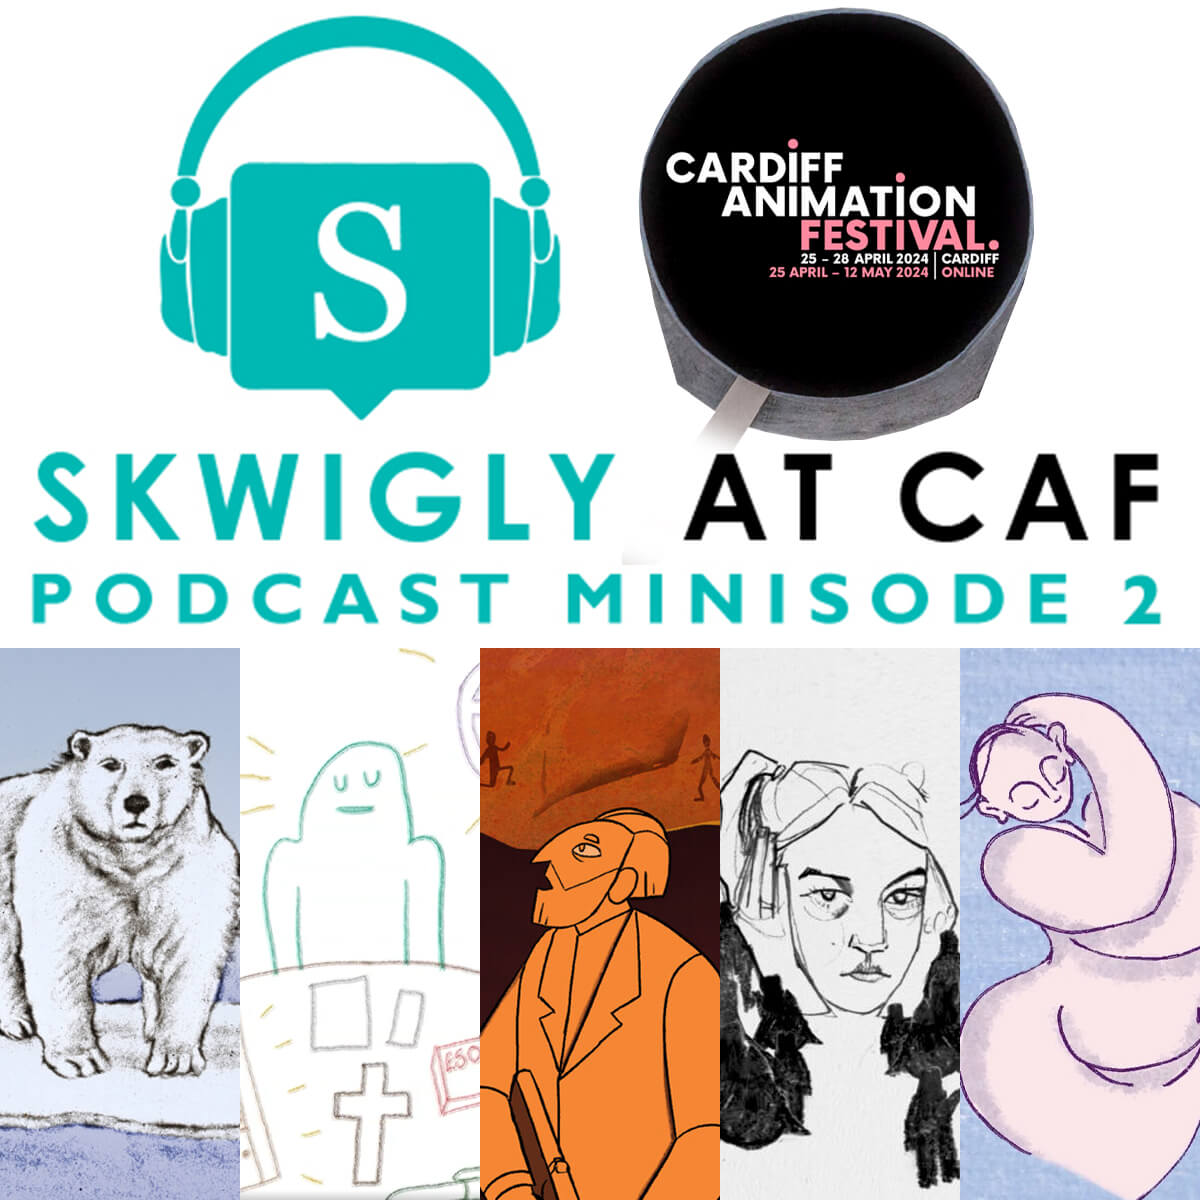 Our @CardiffAnimFest podcast minisodes continue with the second of our Animators Brunch sessions, featuring attending filmmakers @tanyajscott, Gerald Conn, Hannah Fisher @NaomiCrame and Audience Award-winner Lleucu Non!